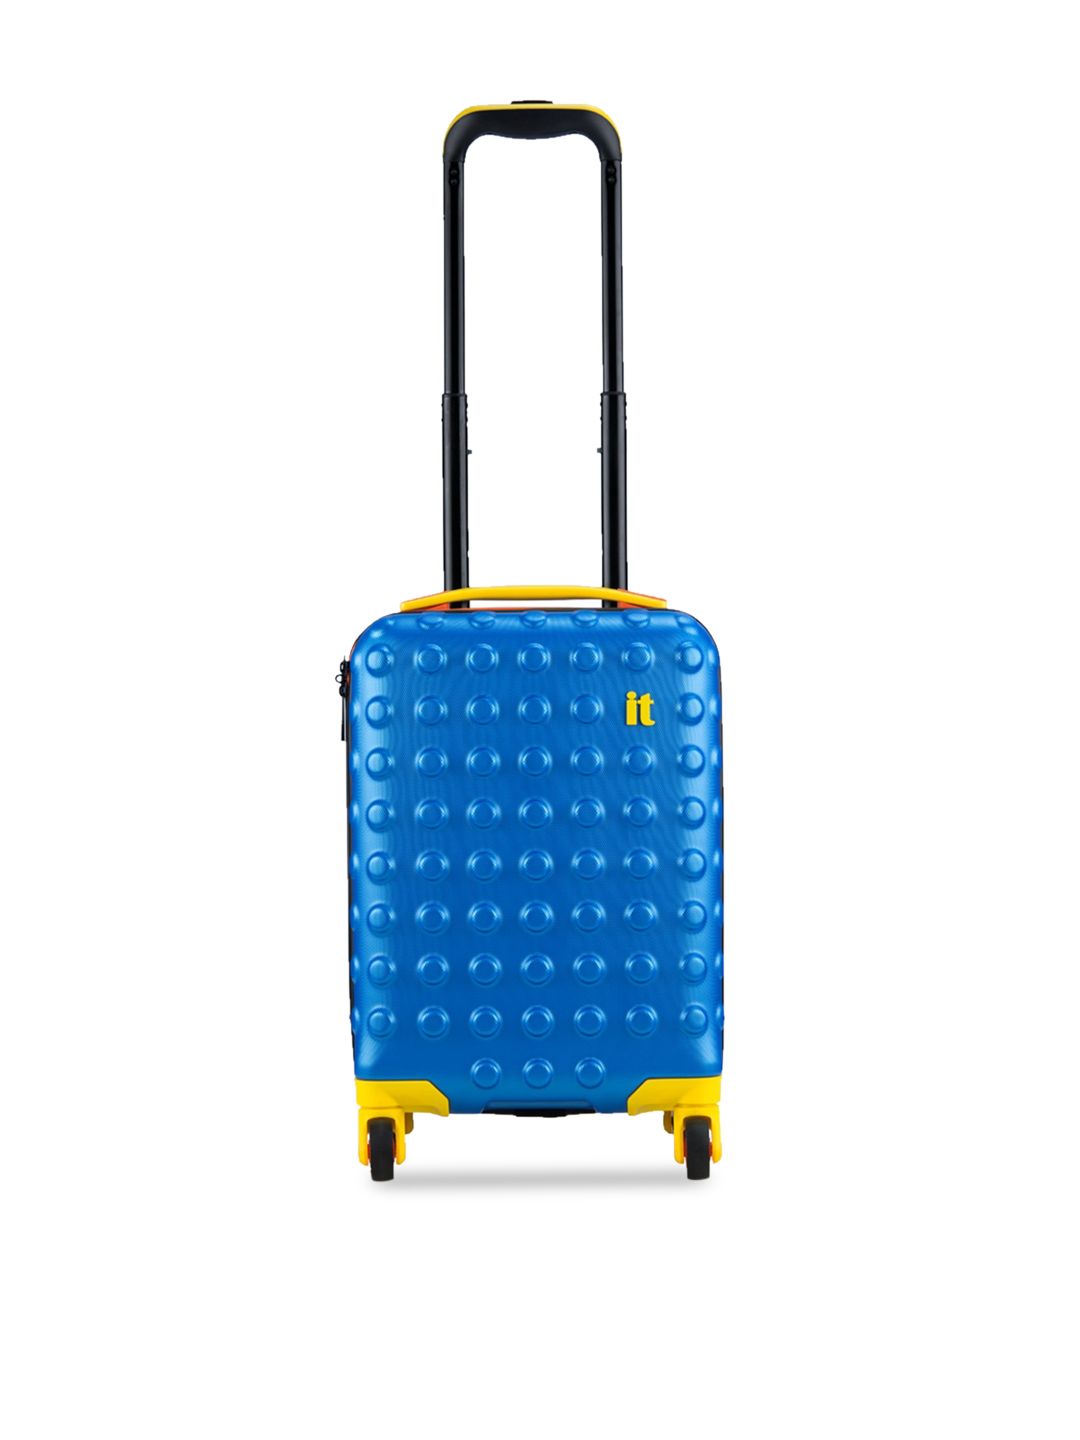 IT luggage Unisex Kids Blue & Yellow Textured Hard-Sided Cabin Trolley Bag Price in India